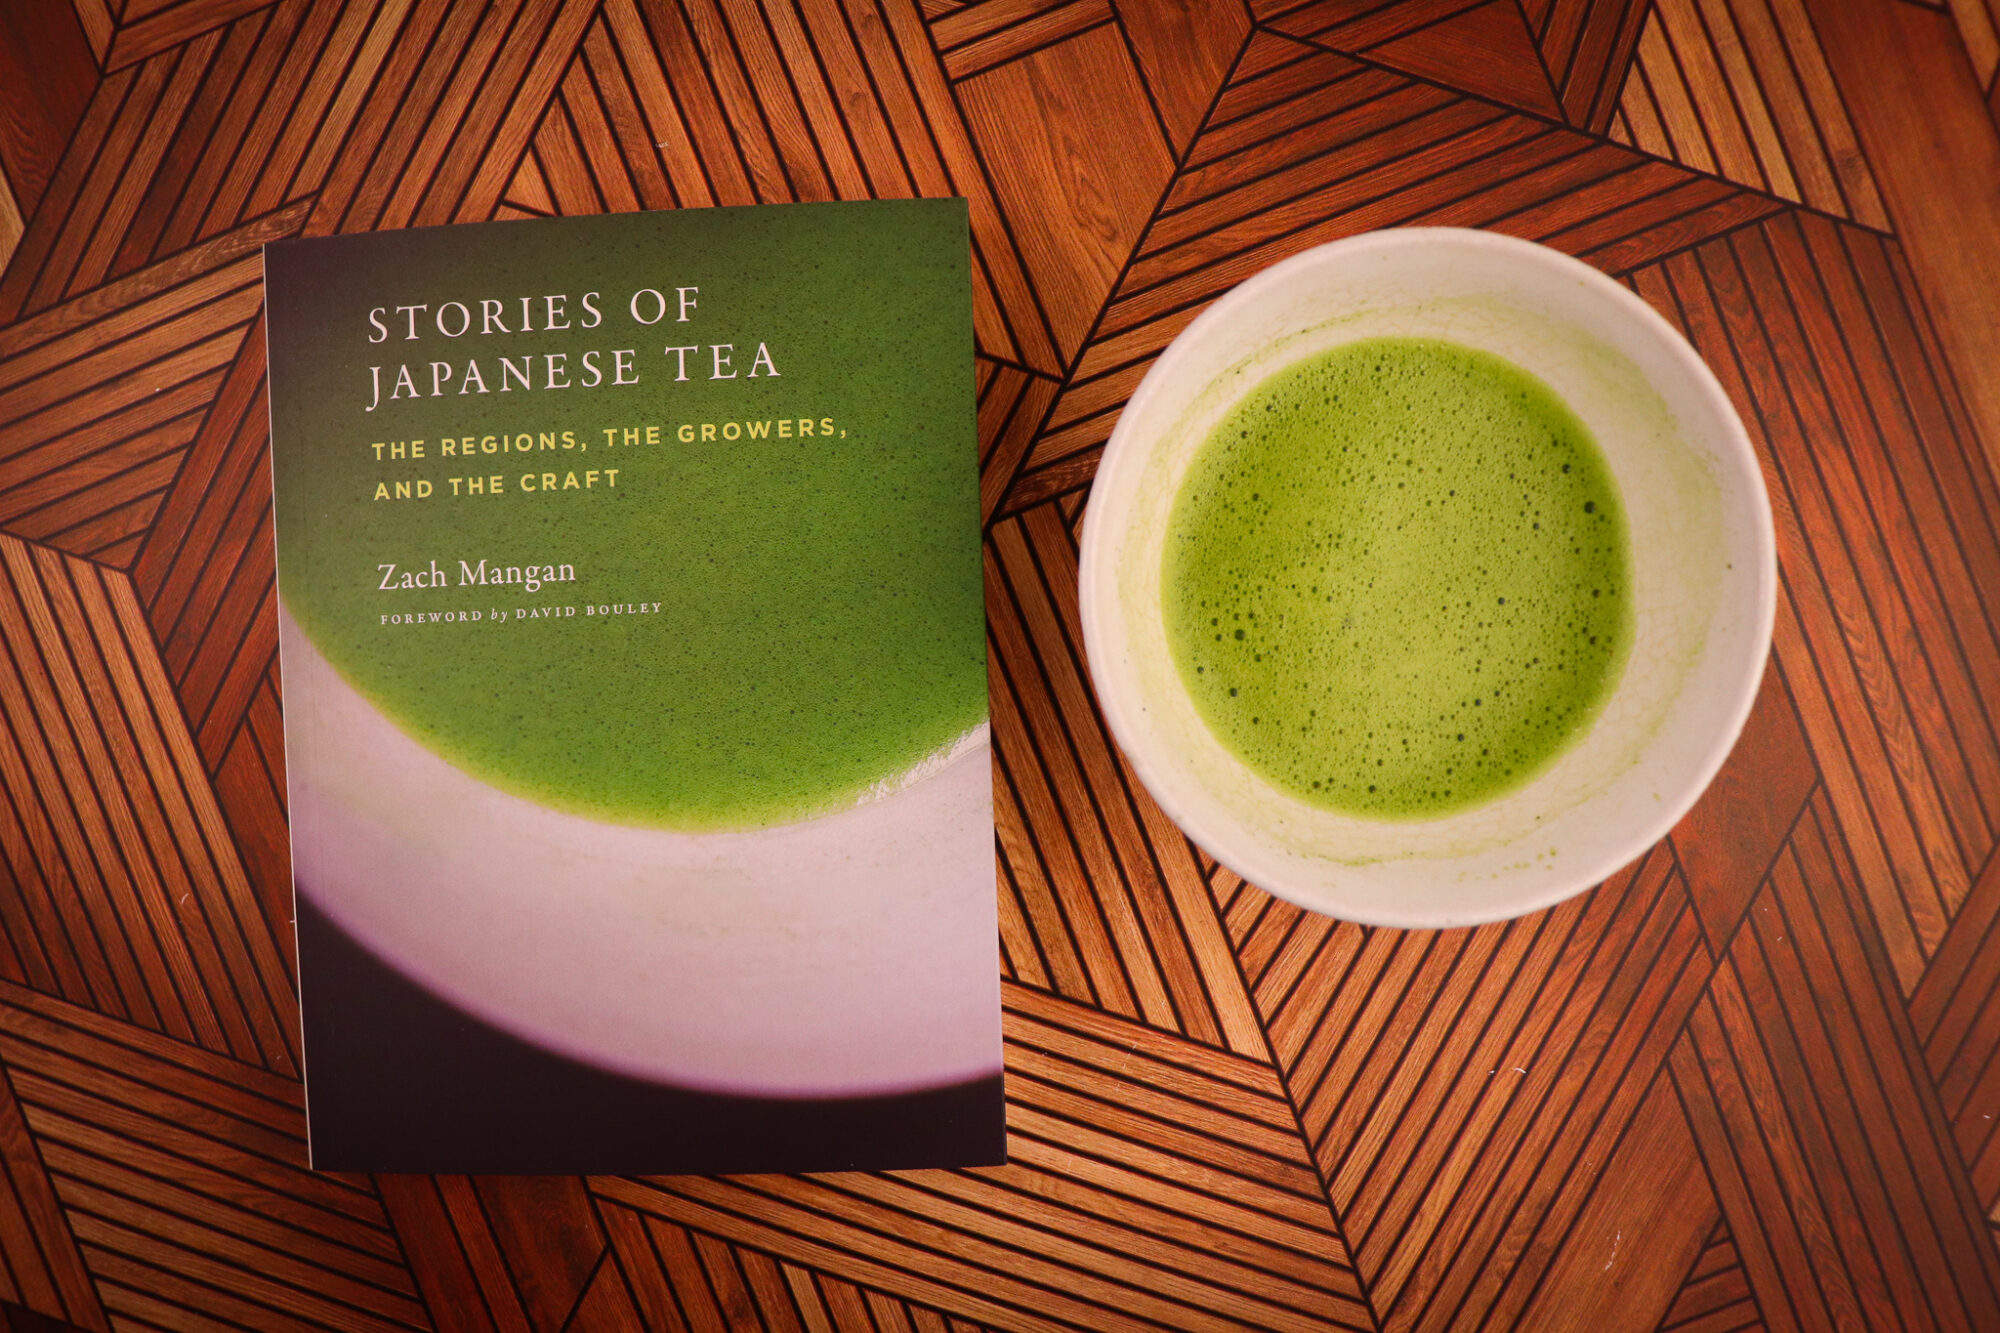 Stories of Japanese Tea: The Regions, the Growers, and the Craft by Zach Mangan